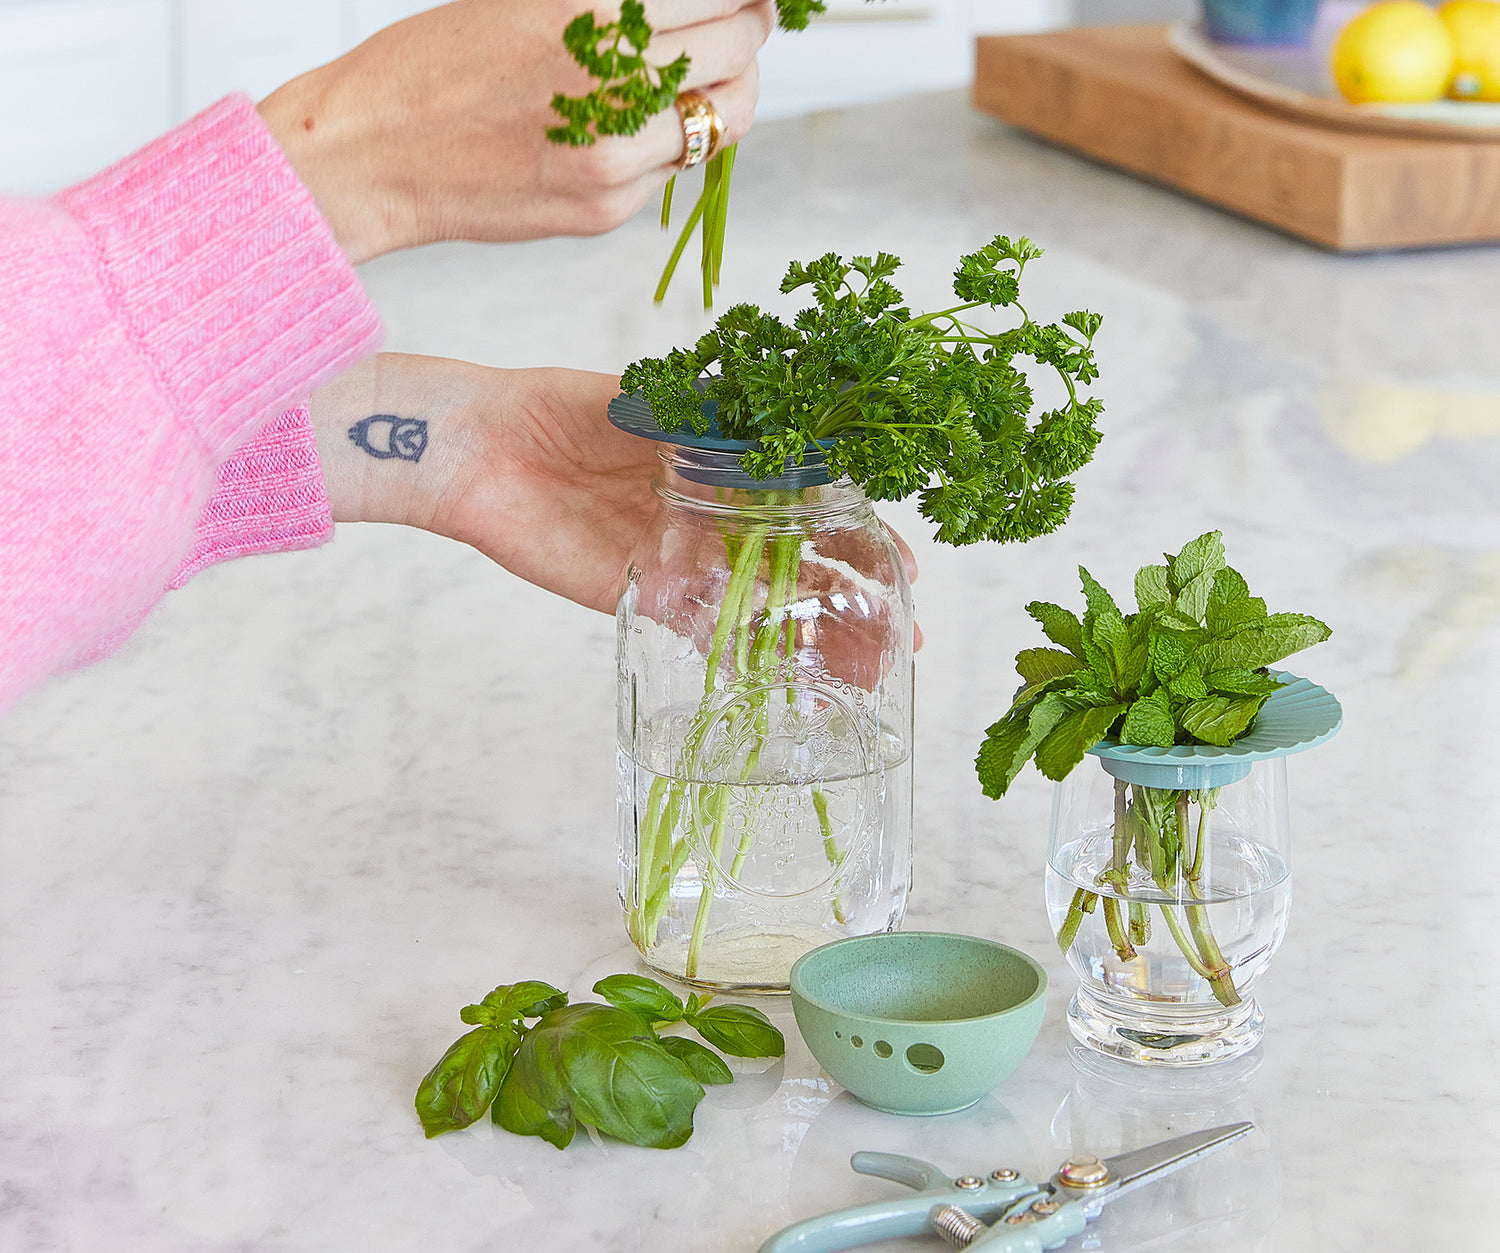 Six Tips to Make the Most of Your Herbs